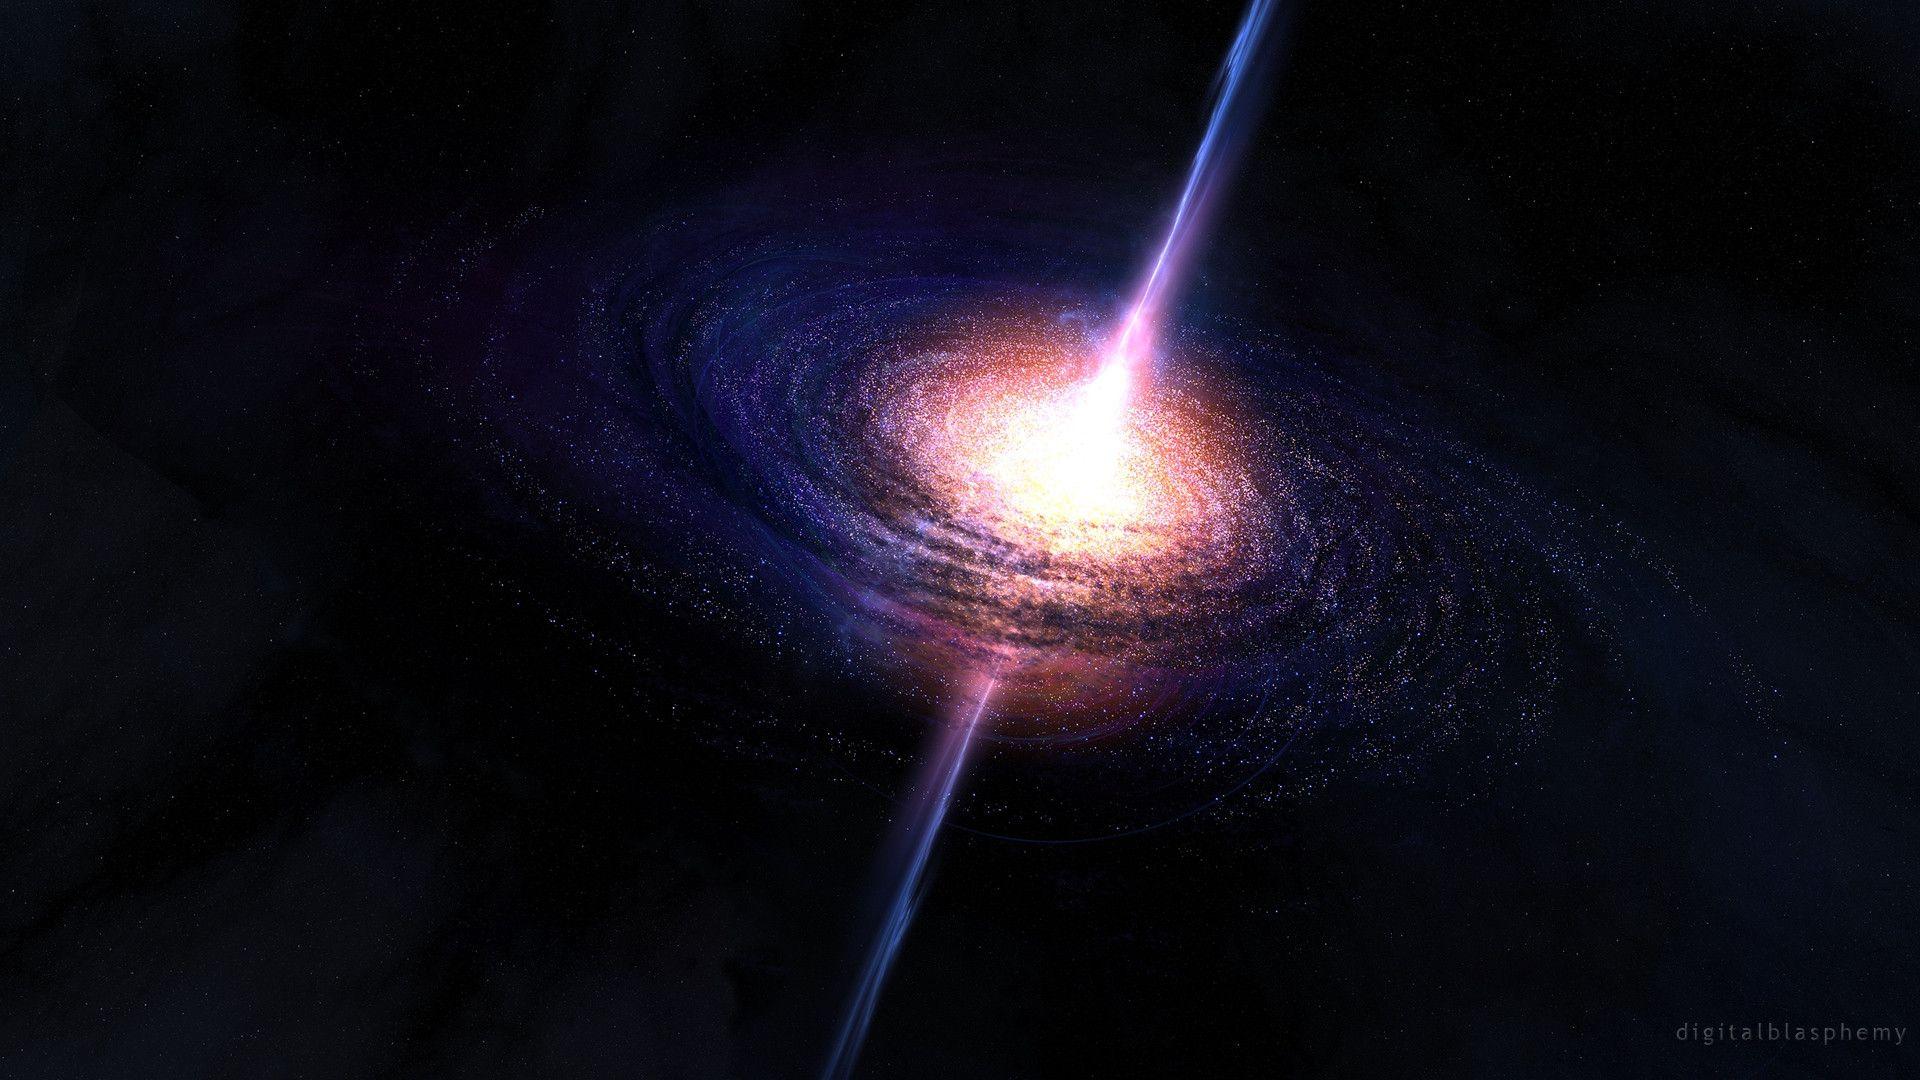 Supermassive Black Hole Wallpapers 30383 Hd Wallpapers in Space